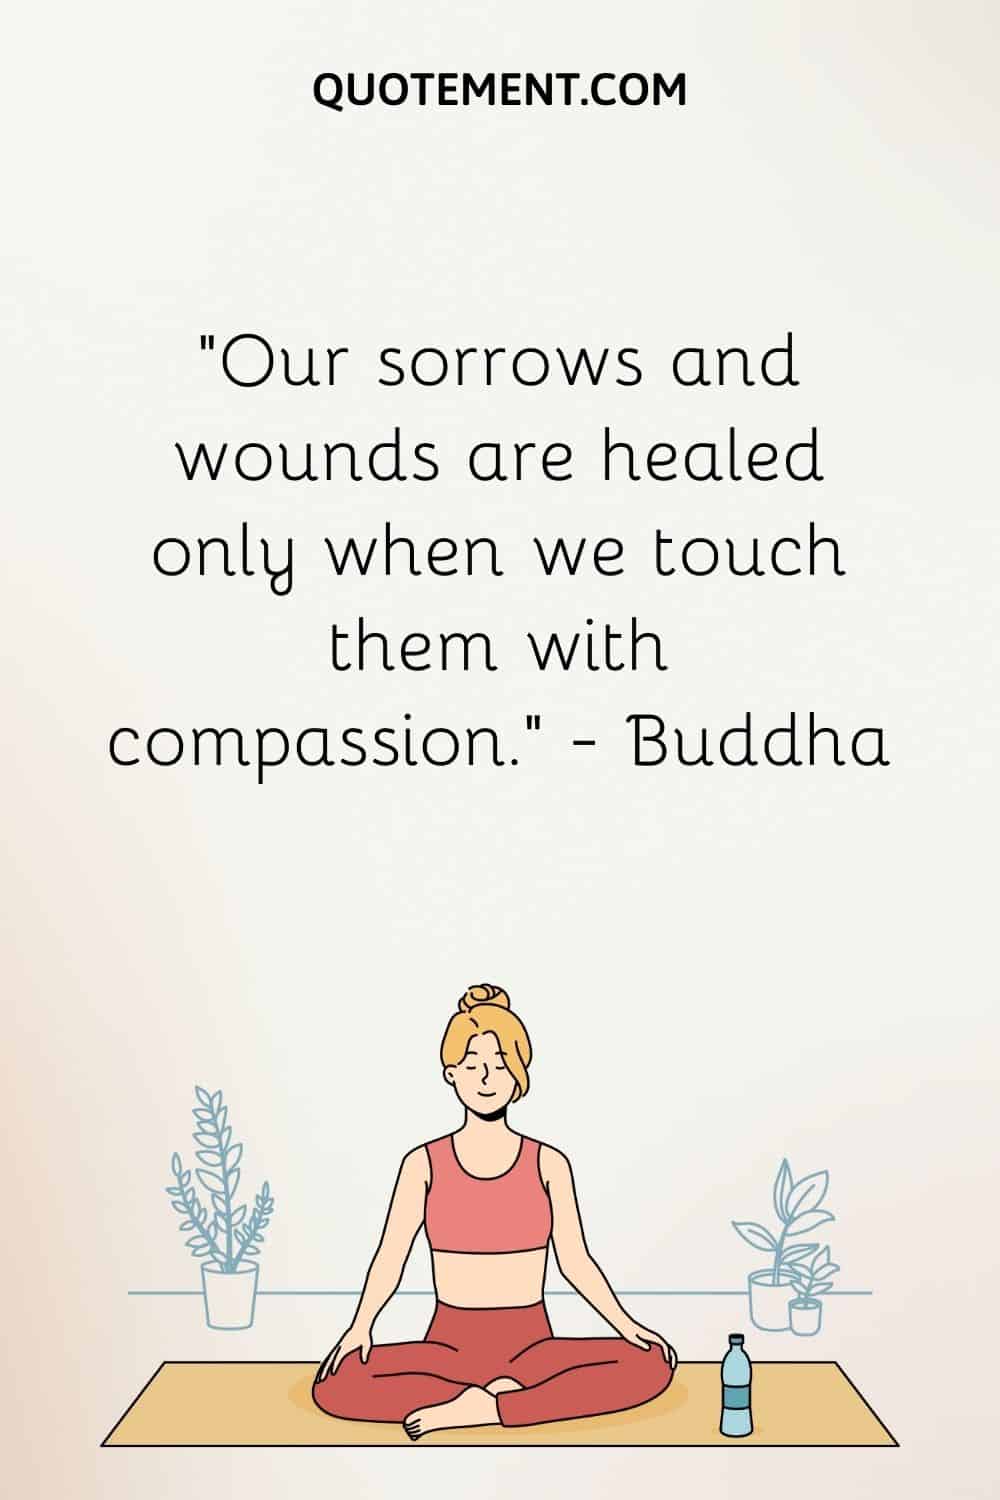 Our sorrows and wounds are healed only when we touch them with compassion